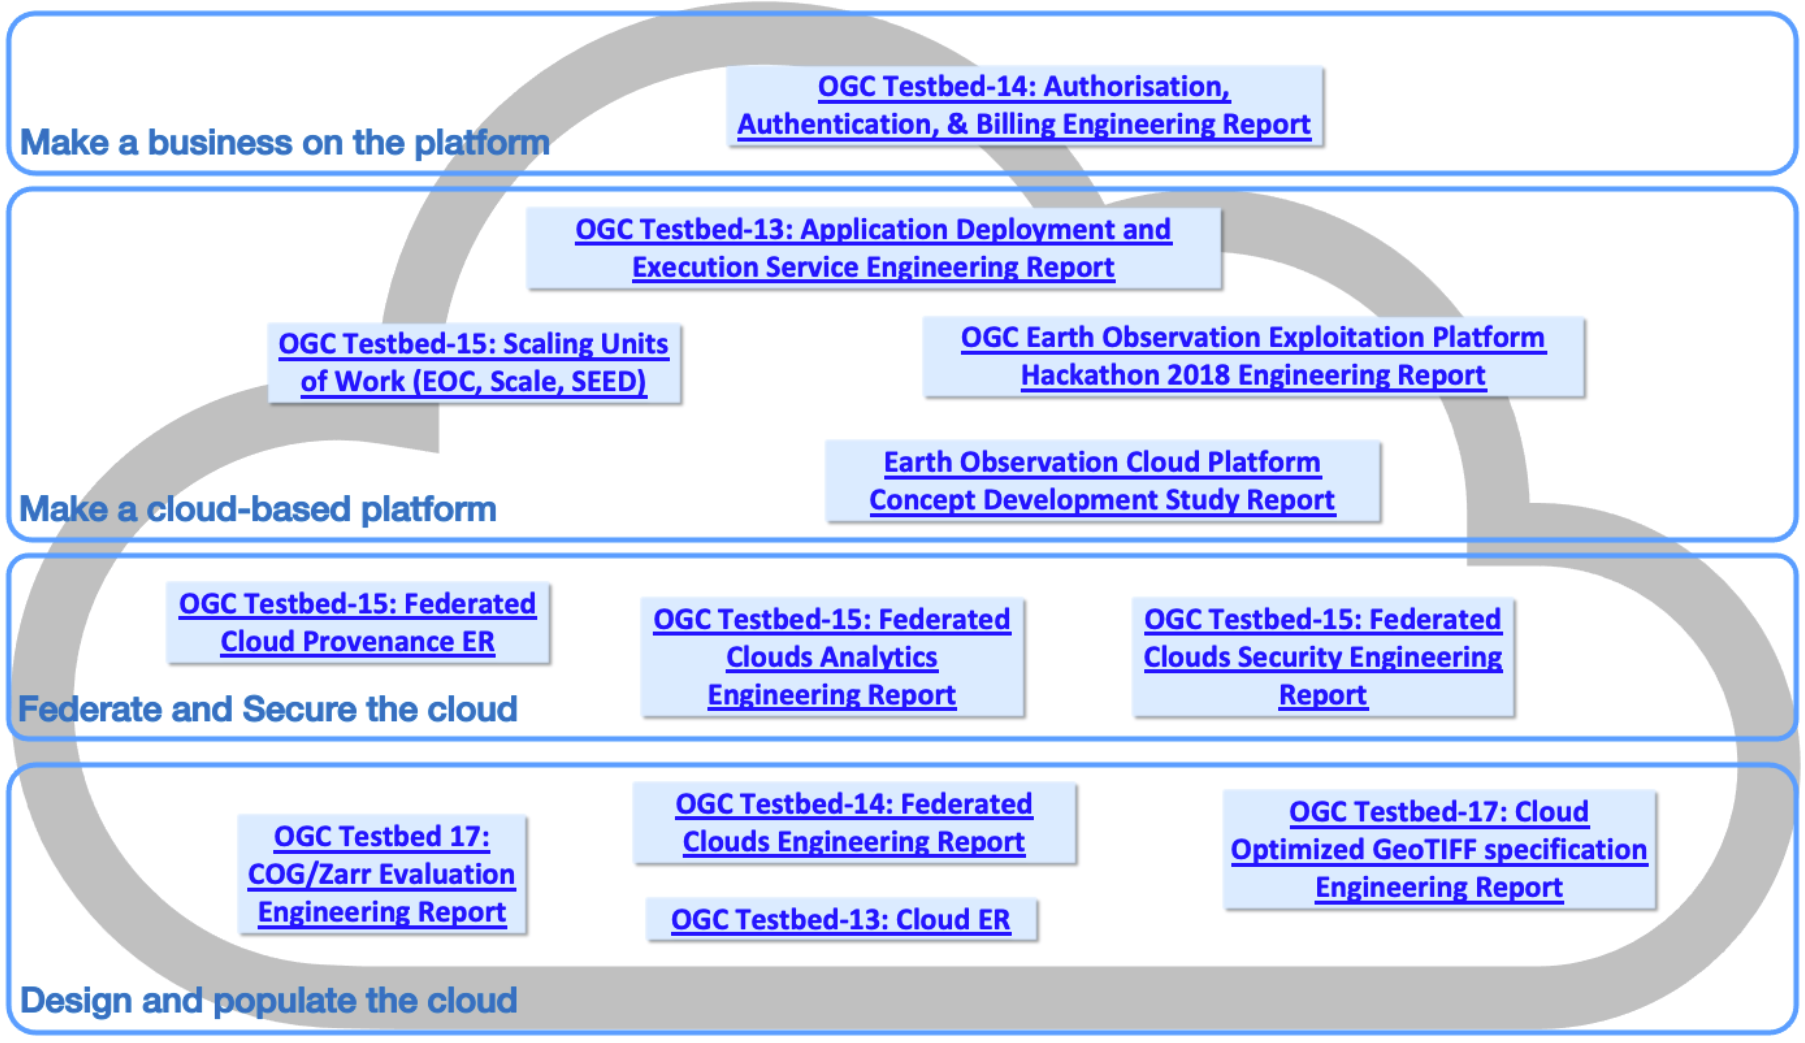 Diagram illustrating where OGC Engineering Reports fit in the Cloud-Native ecosystem